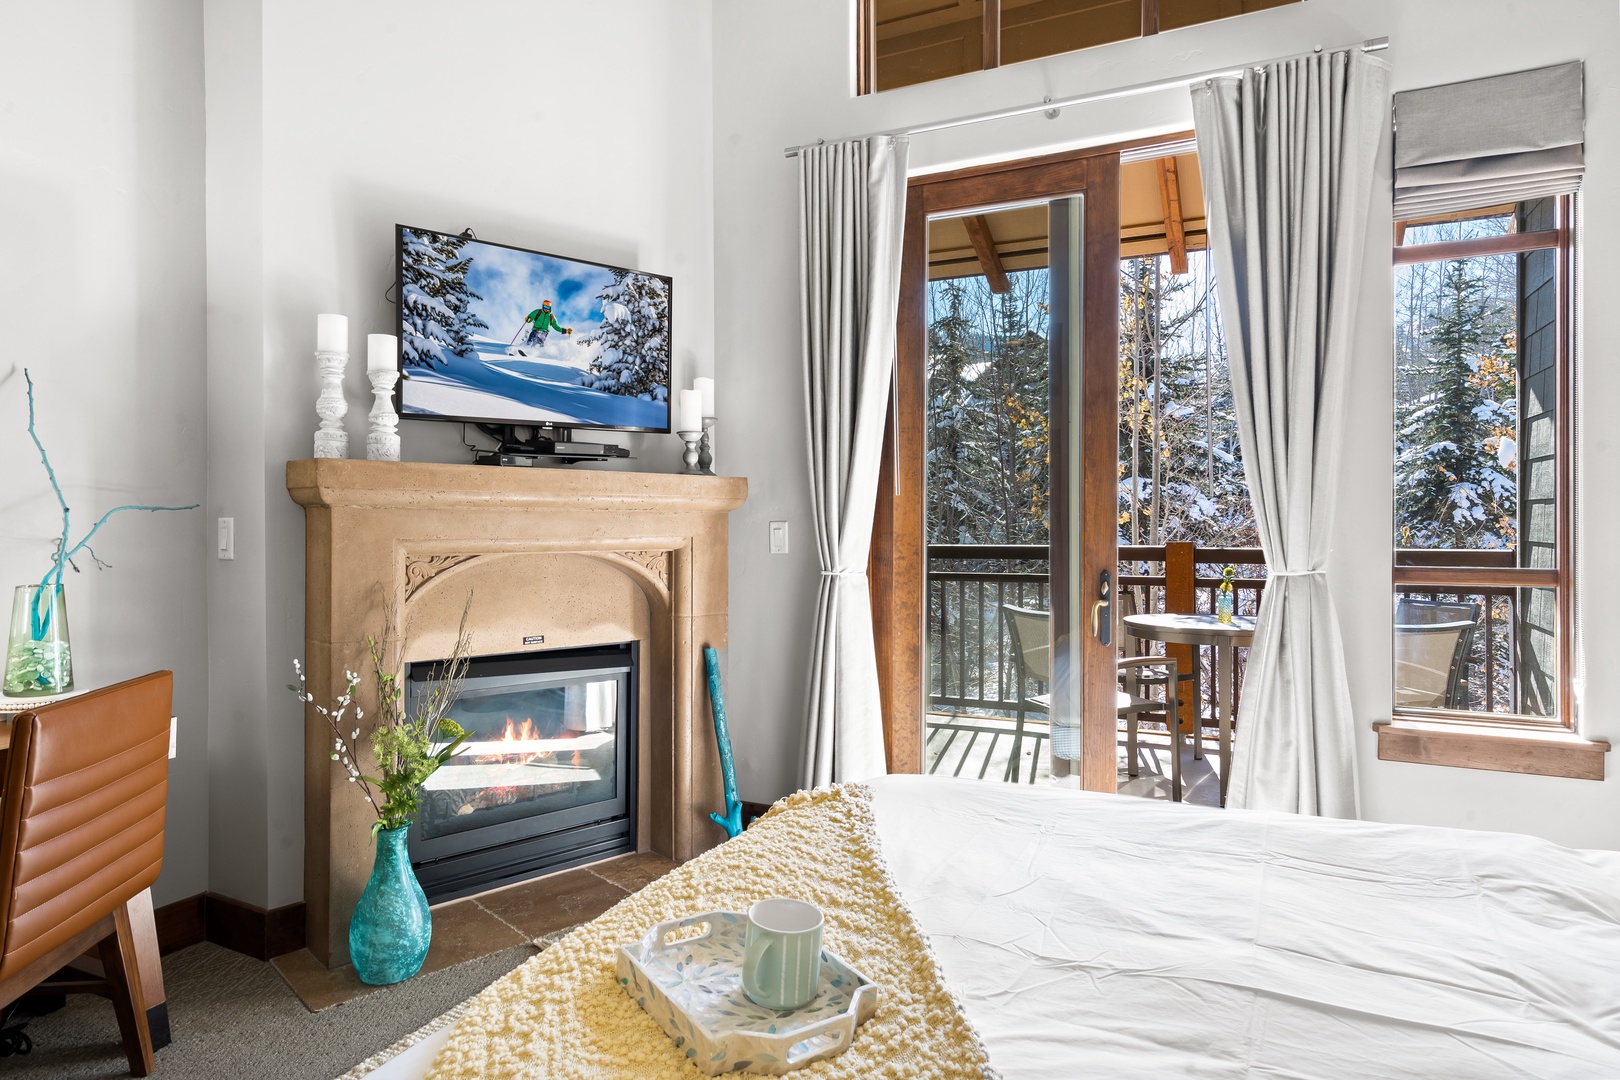 Serenity King Suite w/ Private Balcony, Fireplace, Desk, Kitchenette/Coffee Bar & En-Suite